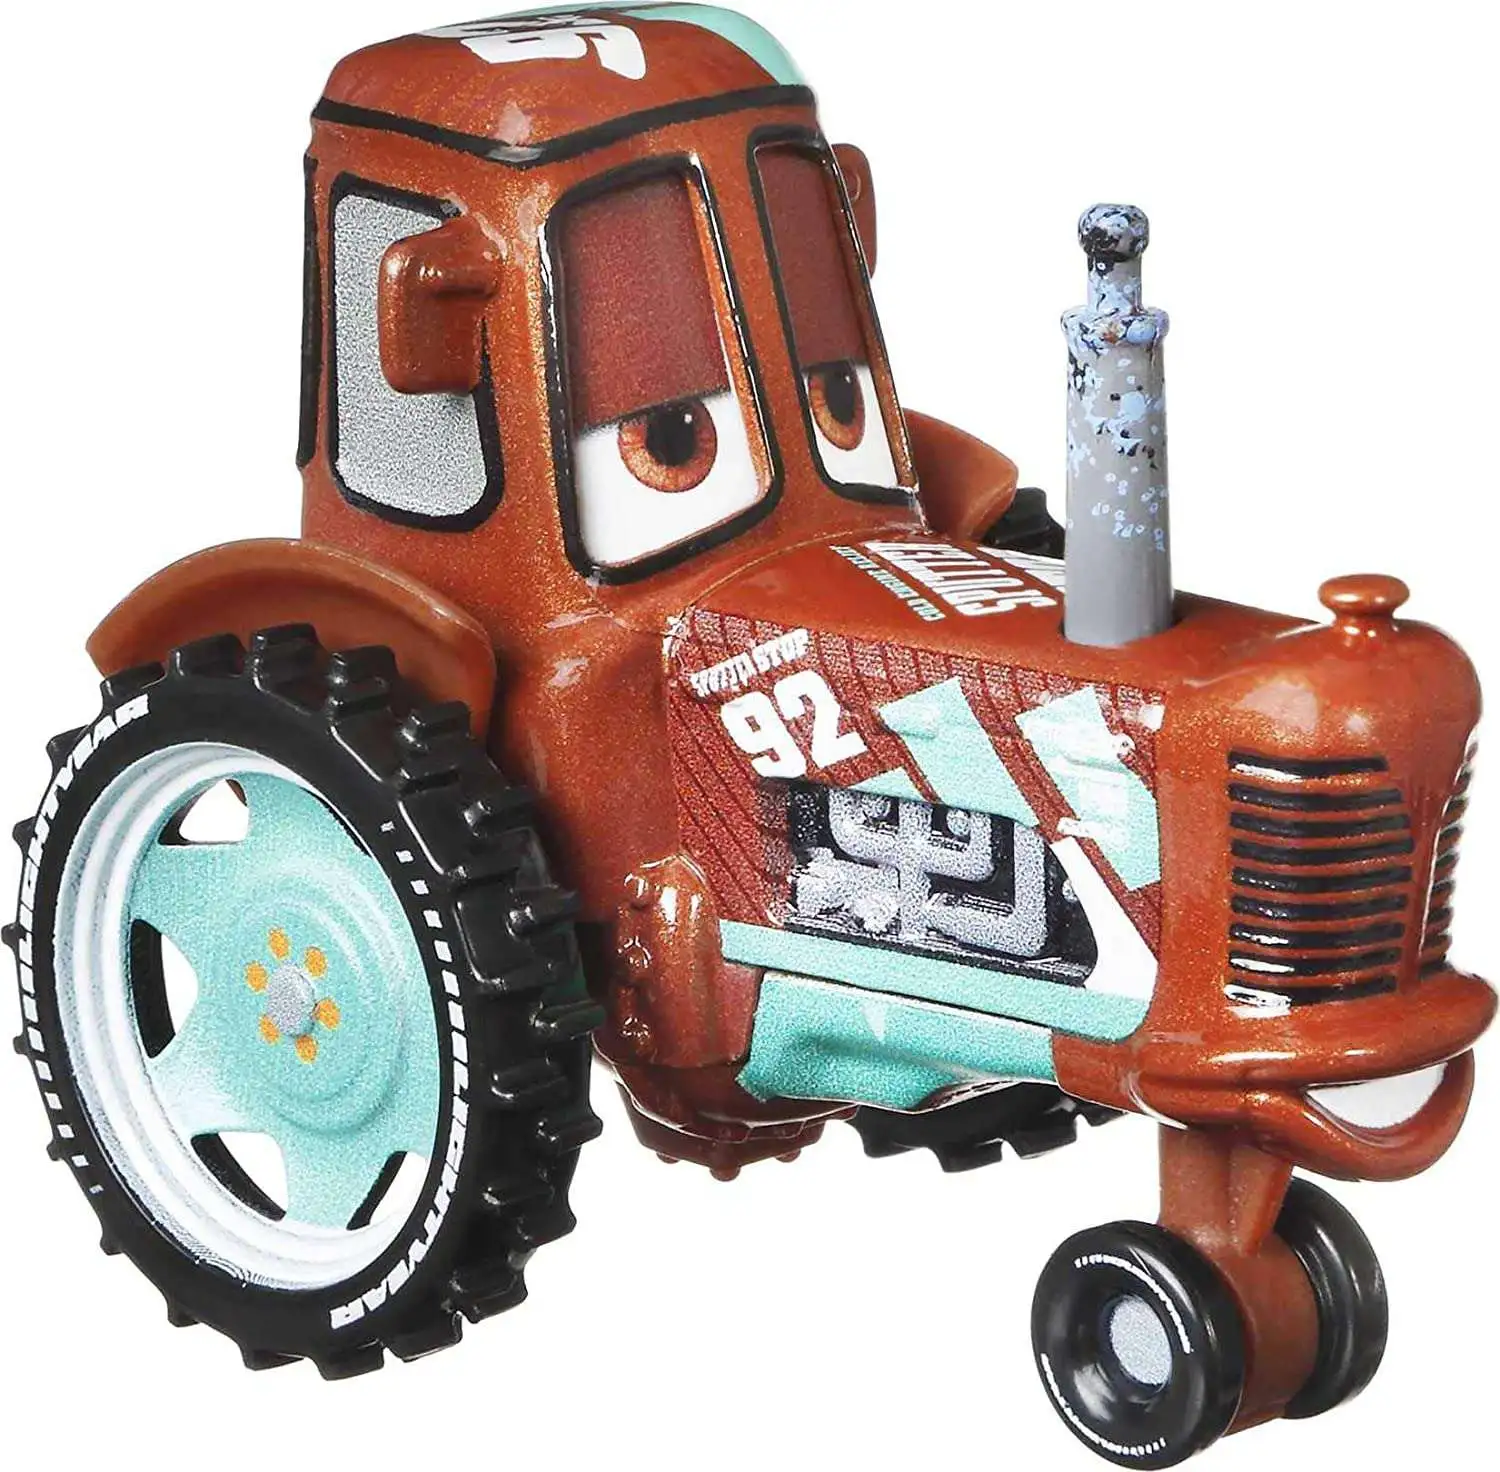 Details about   DISNEY CARS METAL SERIES SPUTTER STOP RACING TRACTOR BRAND NEW FREE US SHIPPING 